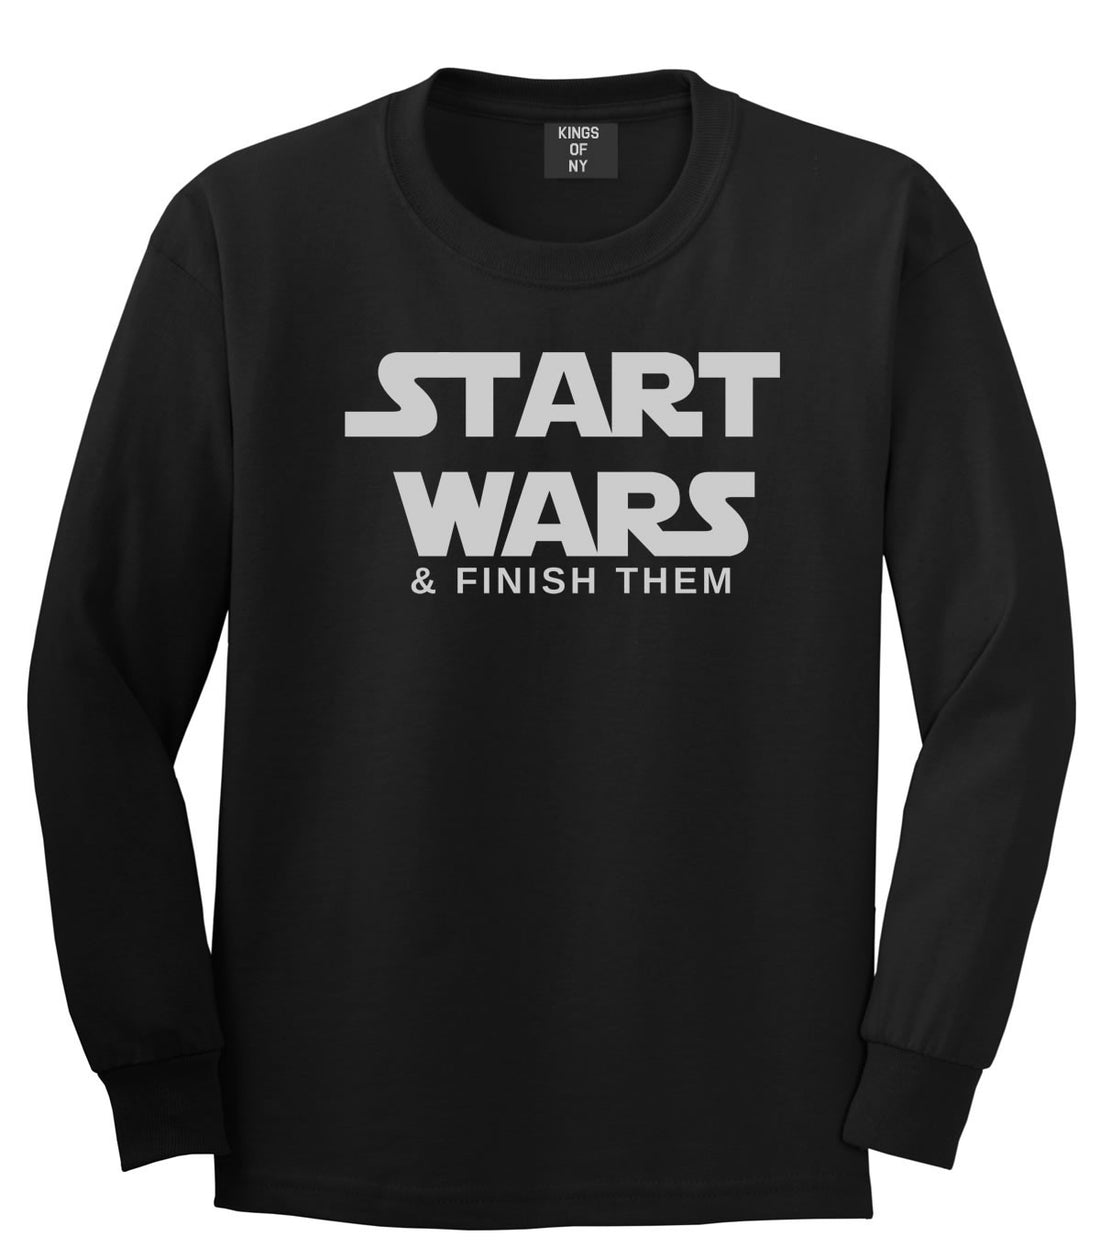 Start Wars Long Sleeve T-Shirt By Kings Of NY